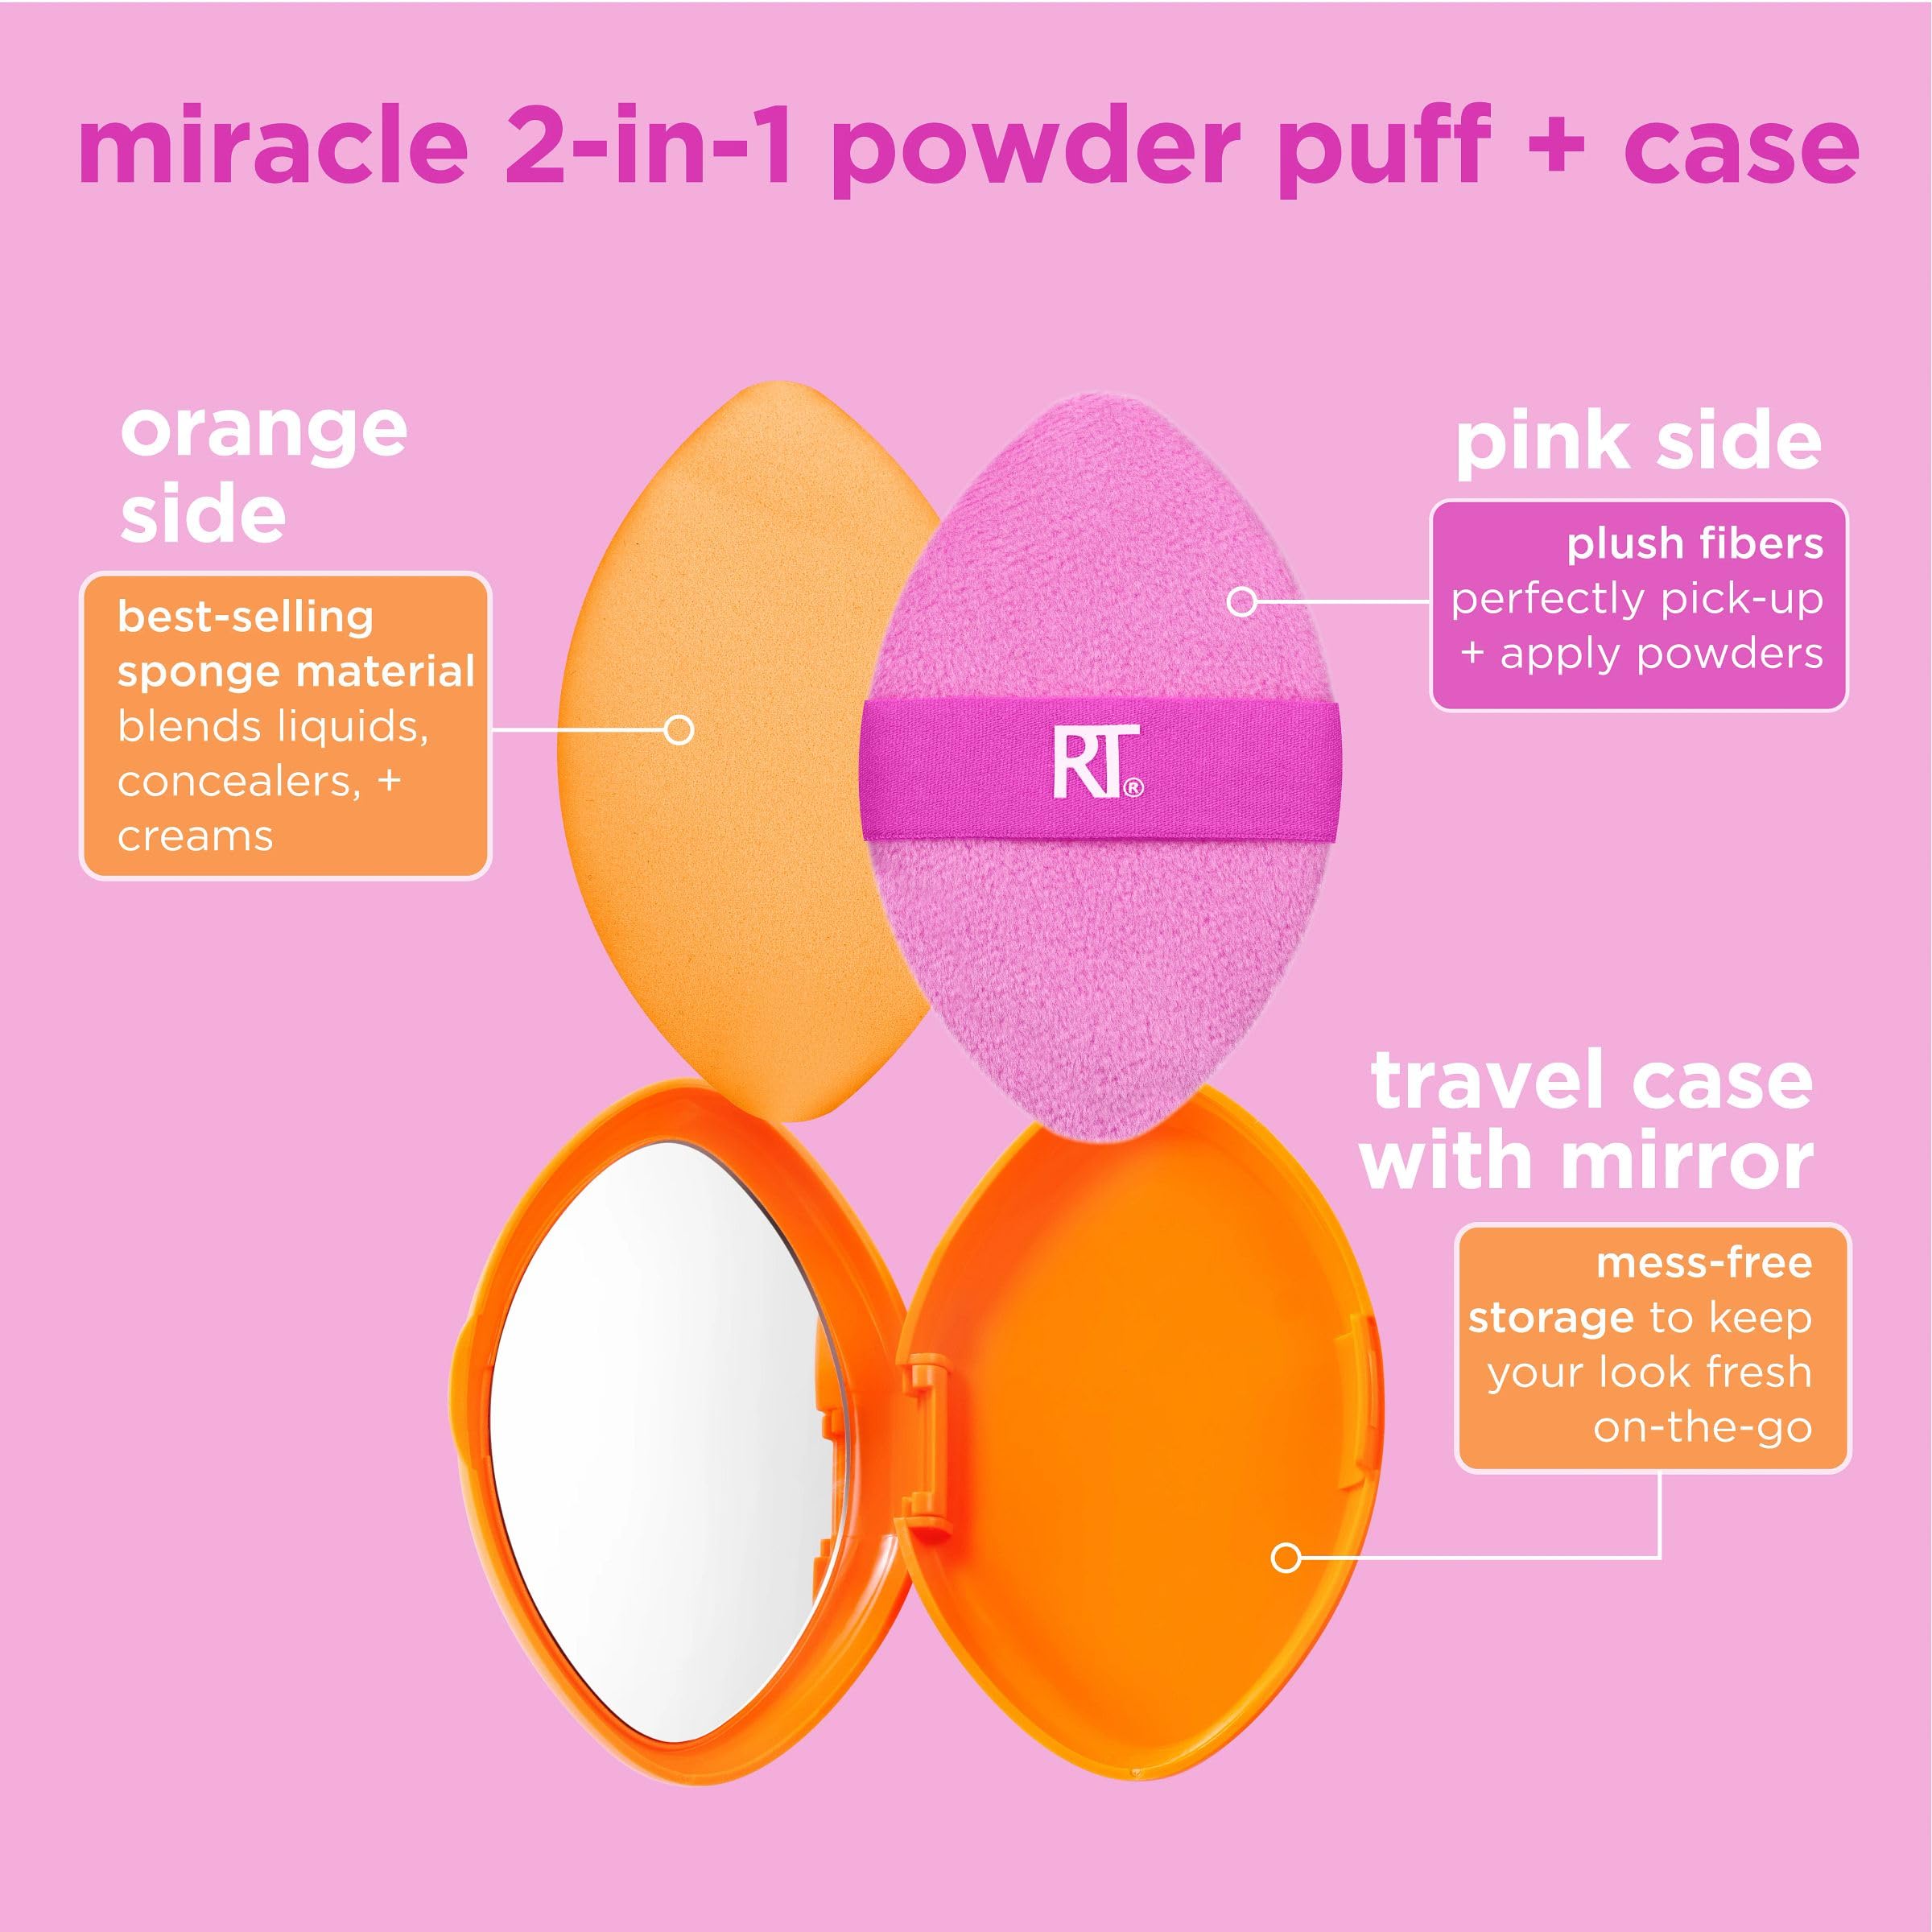 Real Techniques Miracle 2-In-1 Powder Puff + Travel Case, Dual-Sided Makeup Blending Puff, Elastic Band, Precision Makeup Sponge & Powder Puff, For Liquid, Cream & Powders, Travel Case, 2 Count